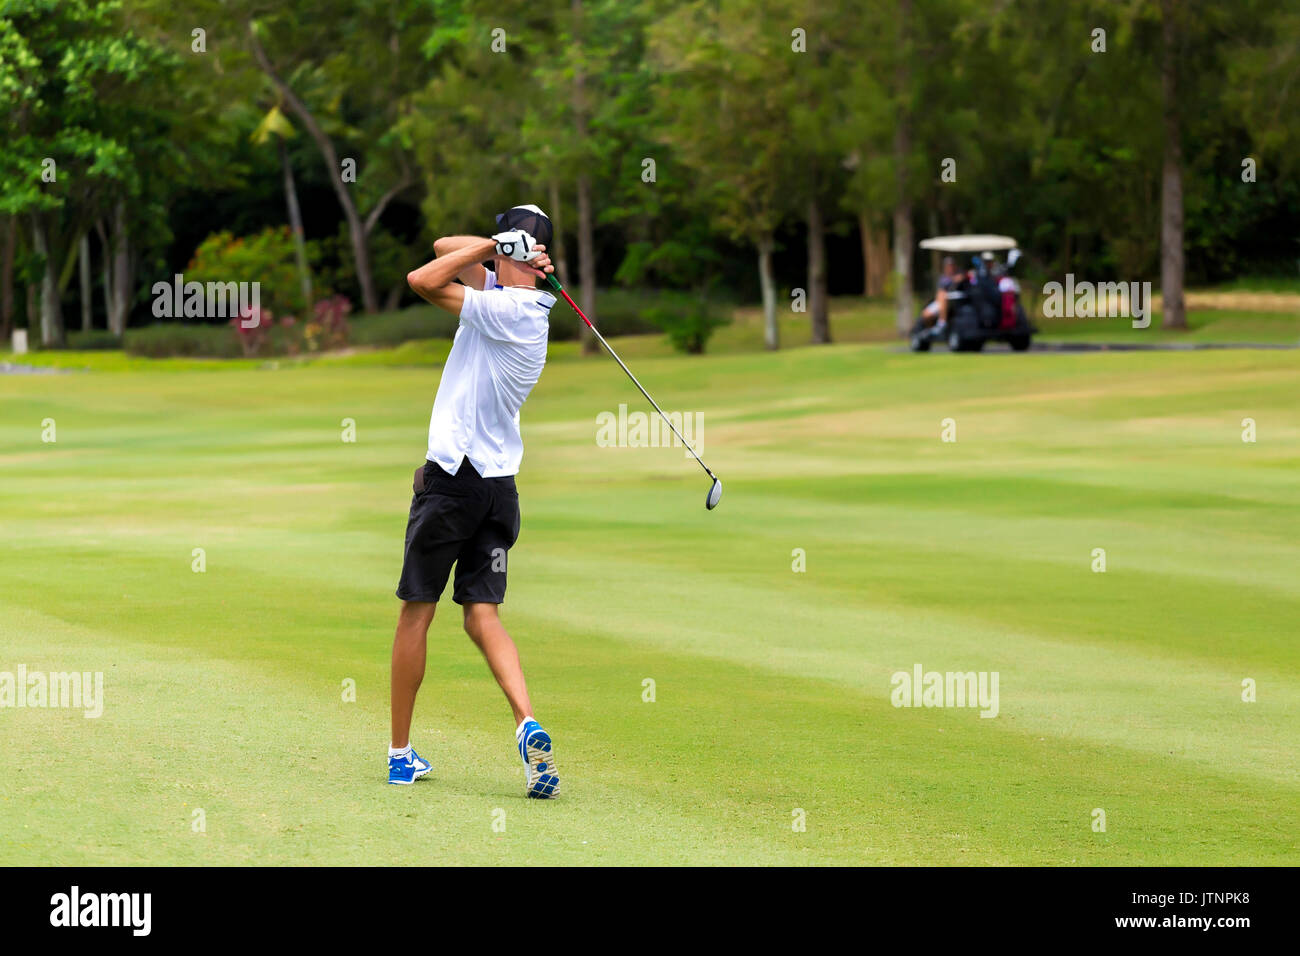 Young man playing golf, Bali, Indonesia Stock Photo